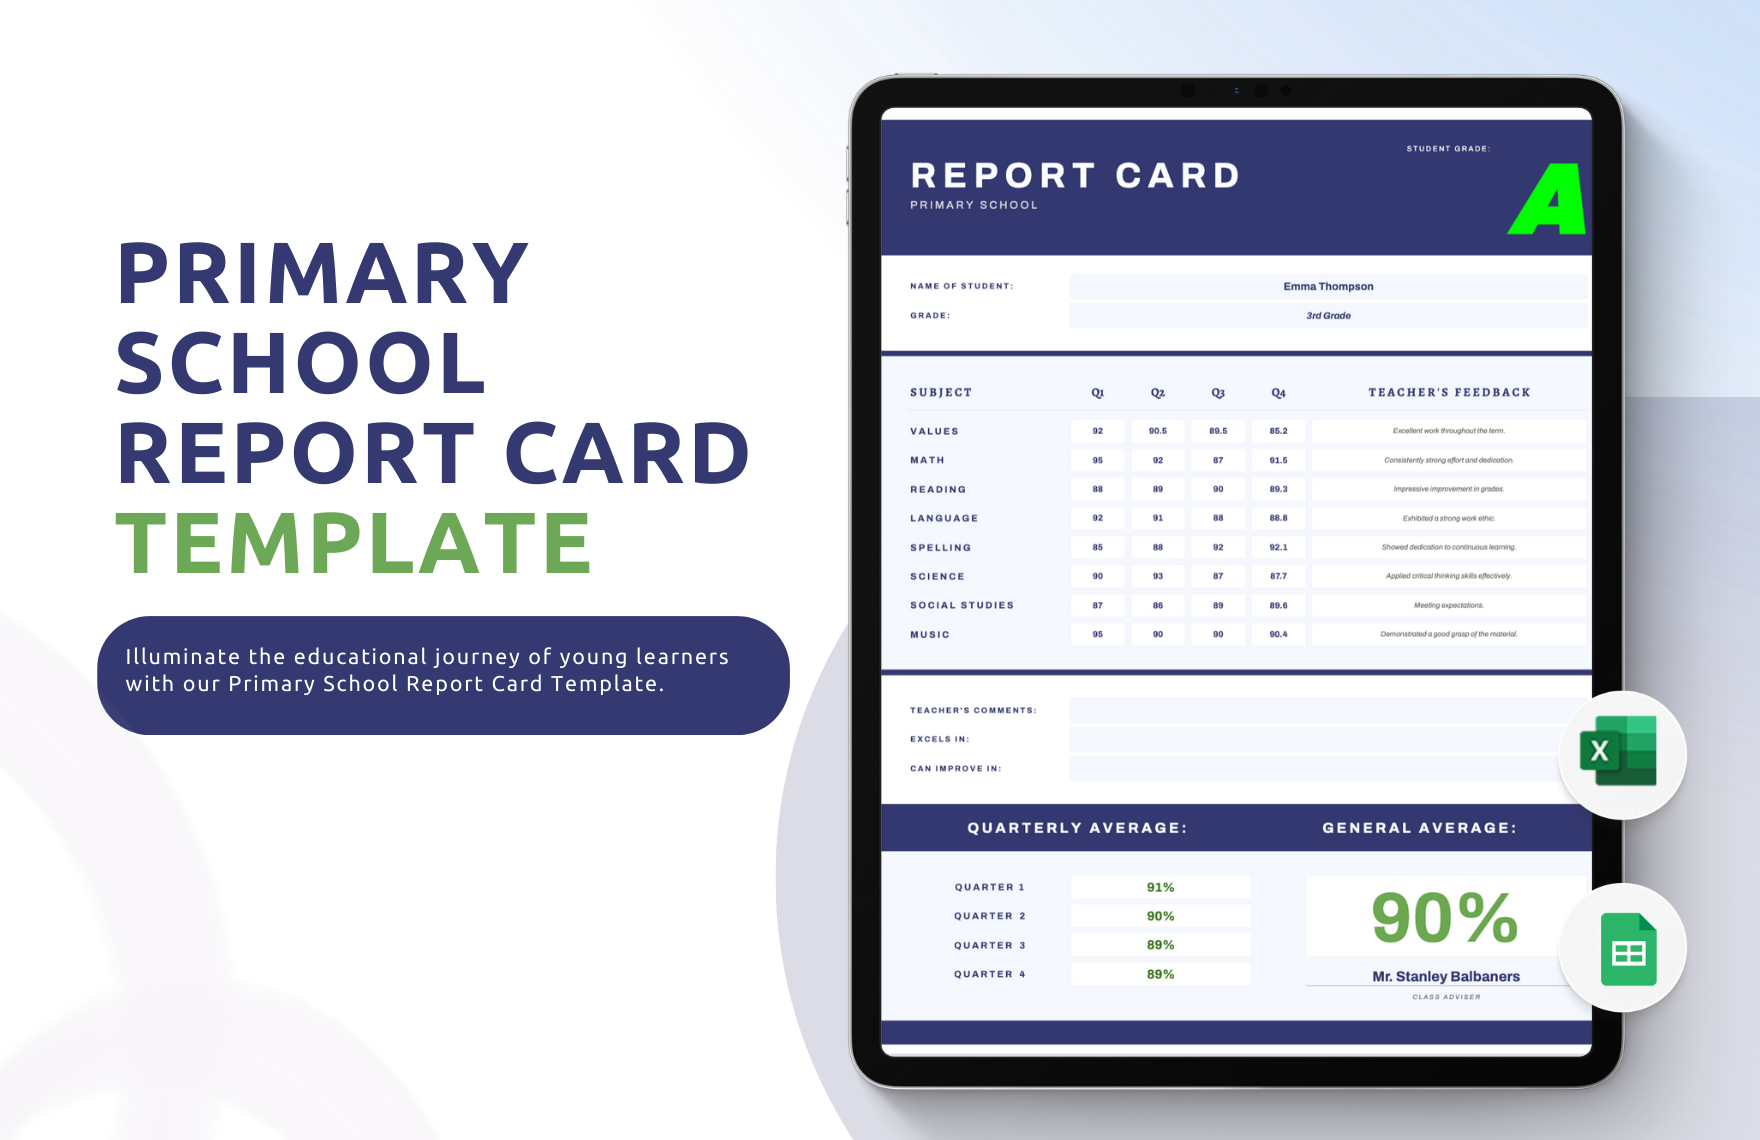 Primary School Report Card Template